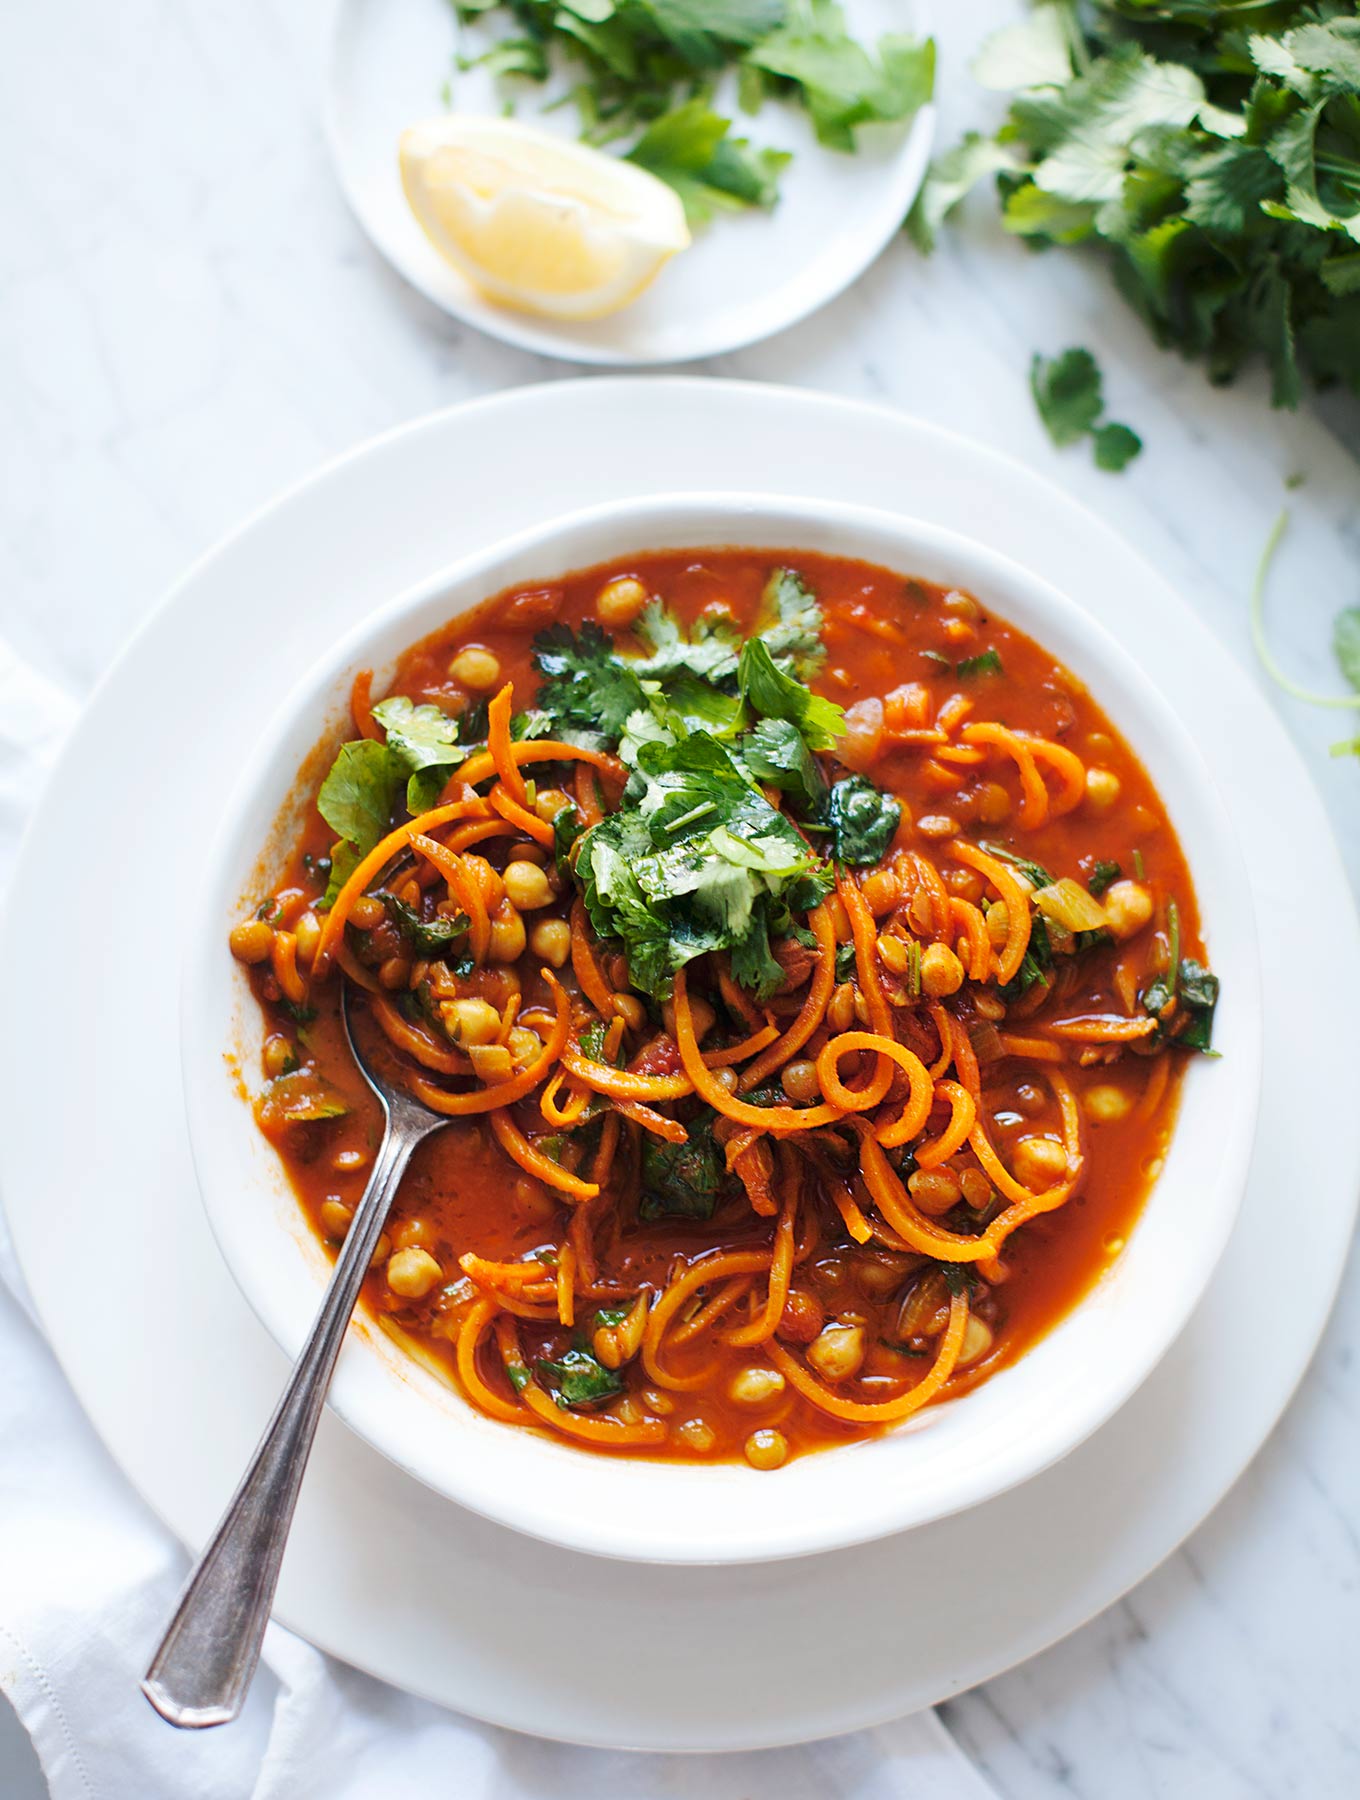 Spicy Chickpea & Sweet Potato Noodle Soup | 17 Vegan Recipes to Kick Off the New Year